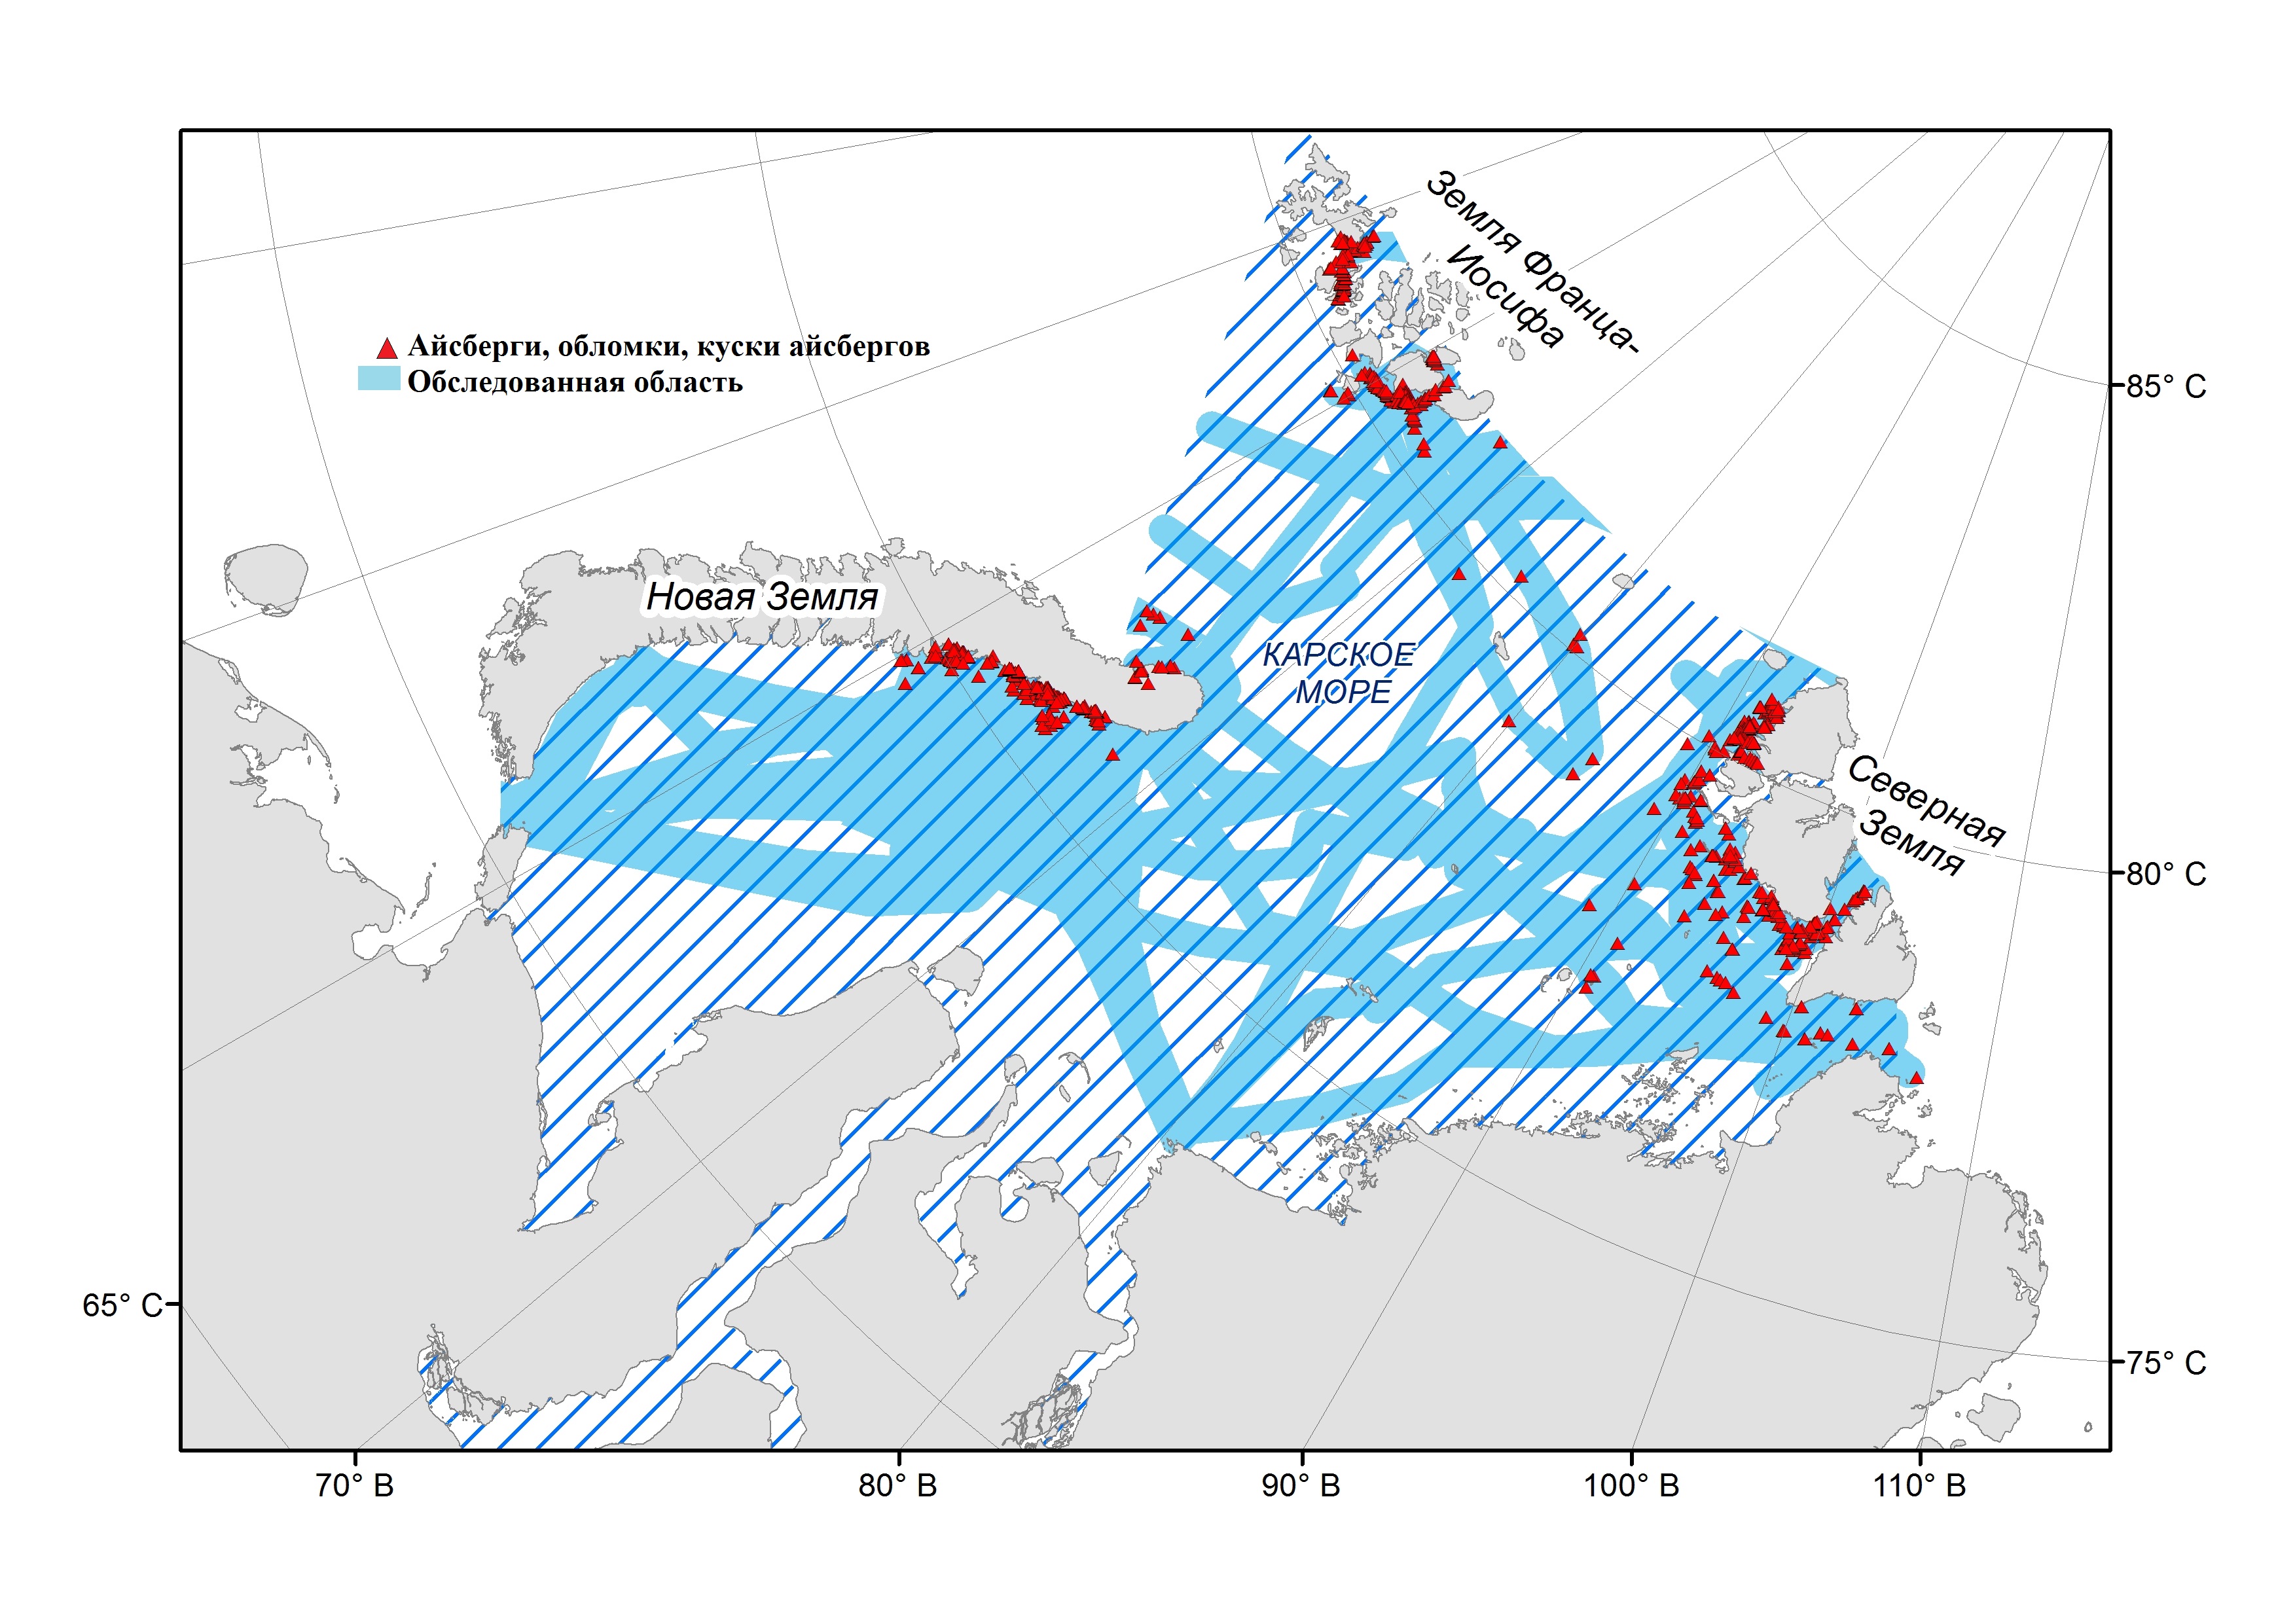 Specific Features of Iceberg Distribution According to Shipborne Observations in the Kara Sea in 2004-2019